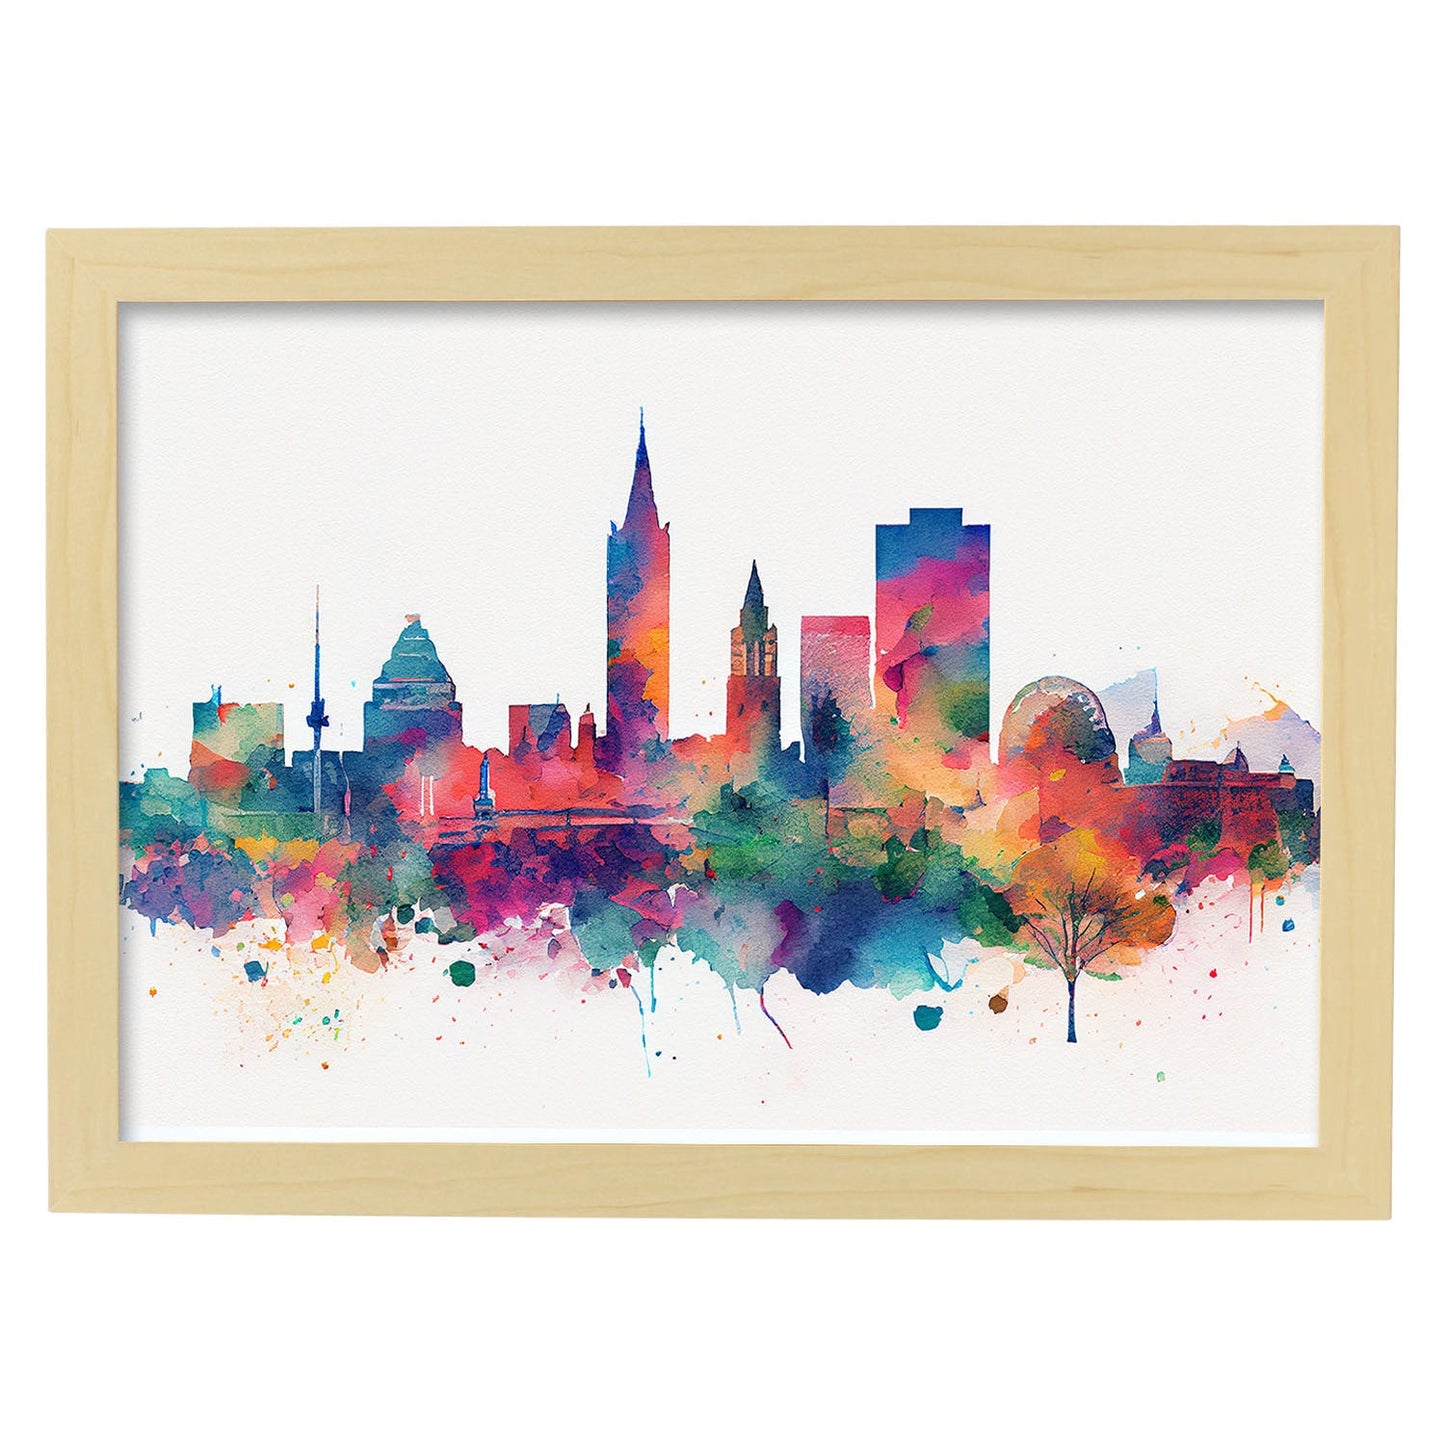 Nacnic watercolor of a skyline of the city of Birmingham. Aesthetic Wall Art Prints for Bedroom or Living Room Design.-Artwork-Nacnic-A4-Marco Madera Clara-Nacnic Estudio SL